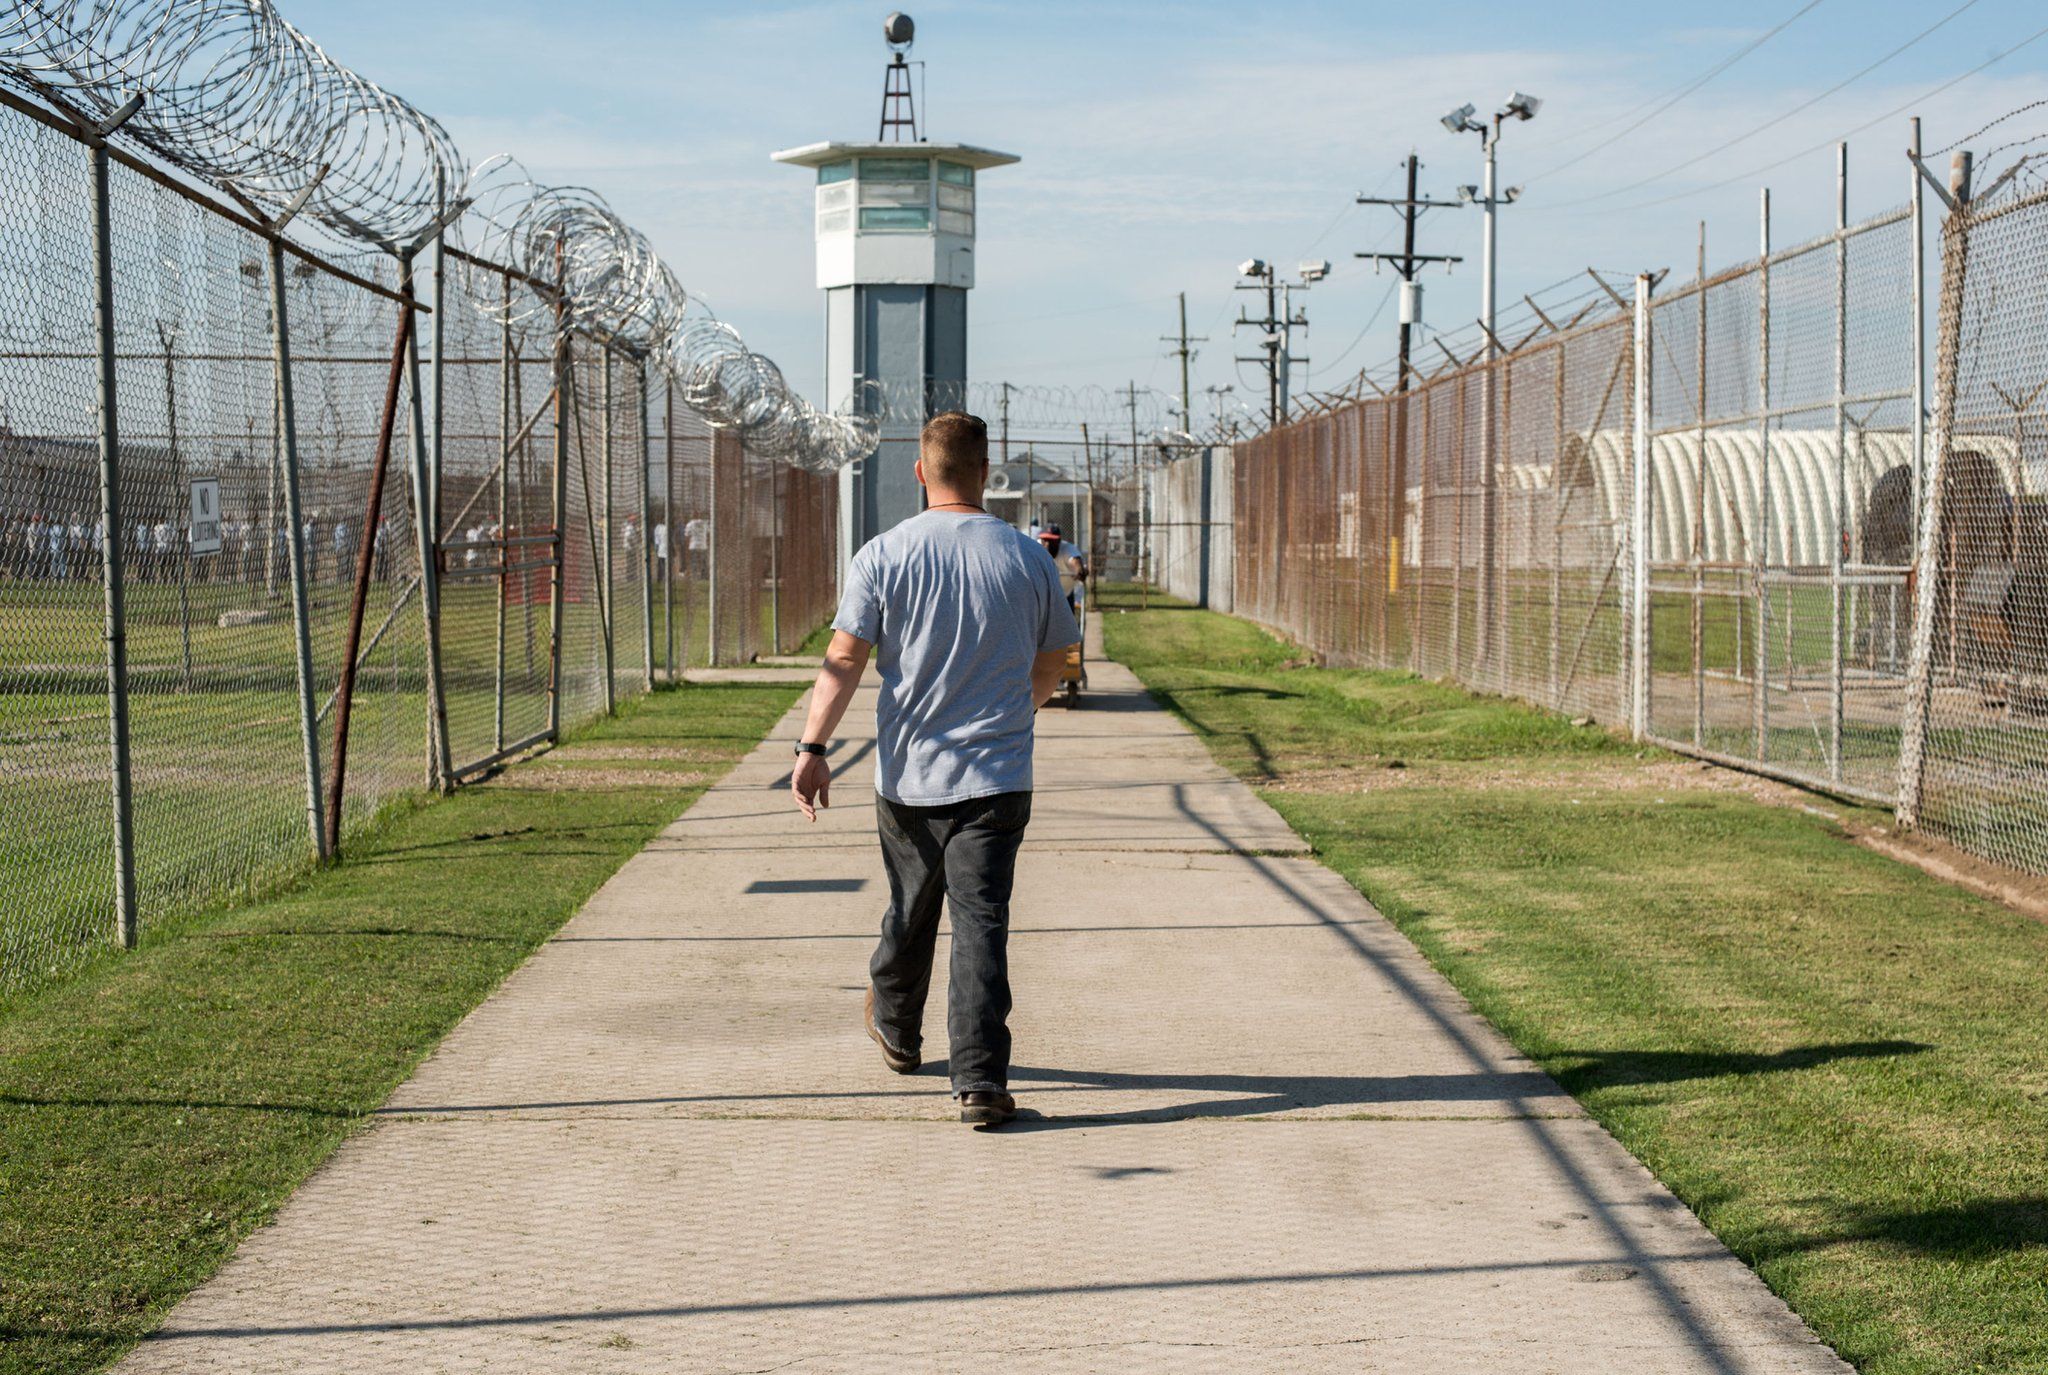 A prisoner walks through a fenced section toward a guard tower at Louisiana State Penitentiary, also known as Angola